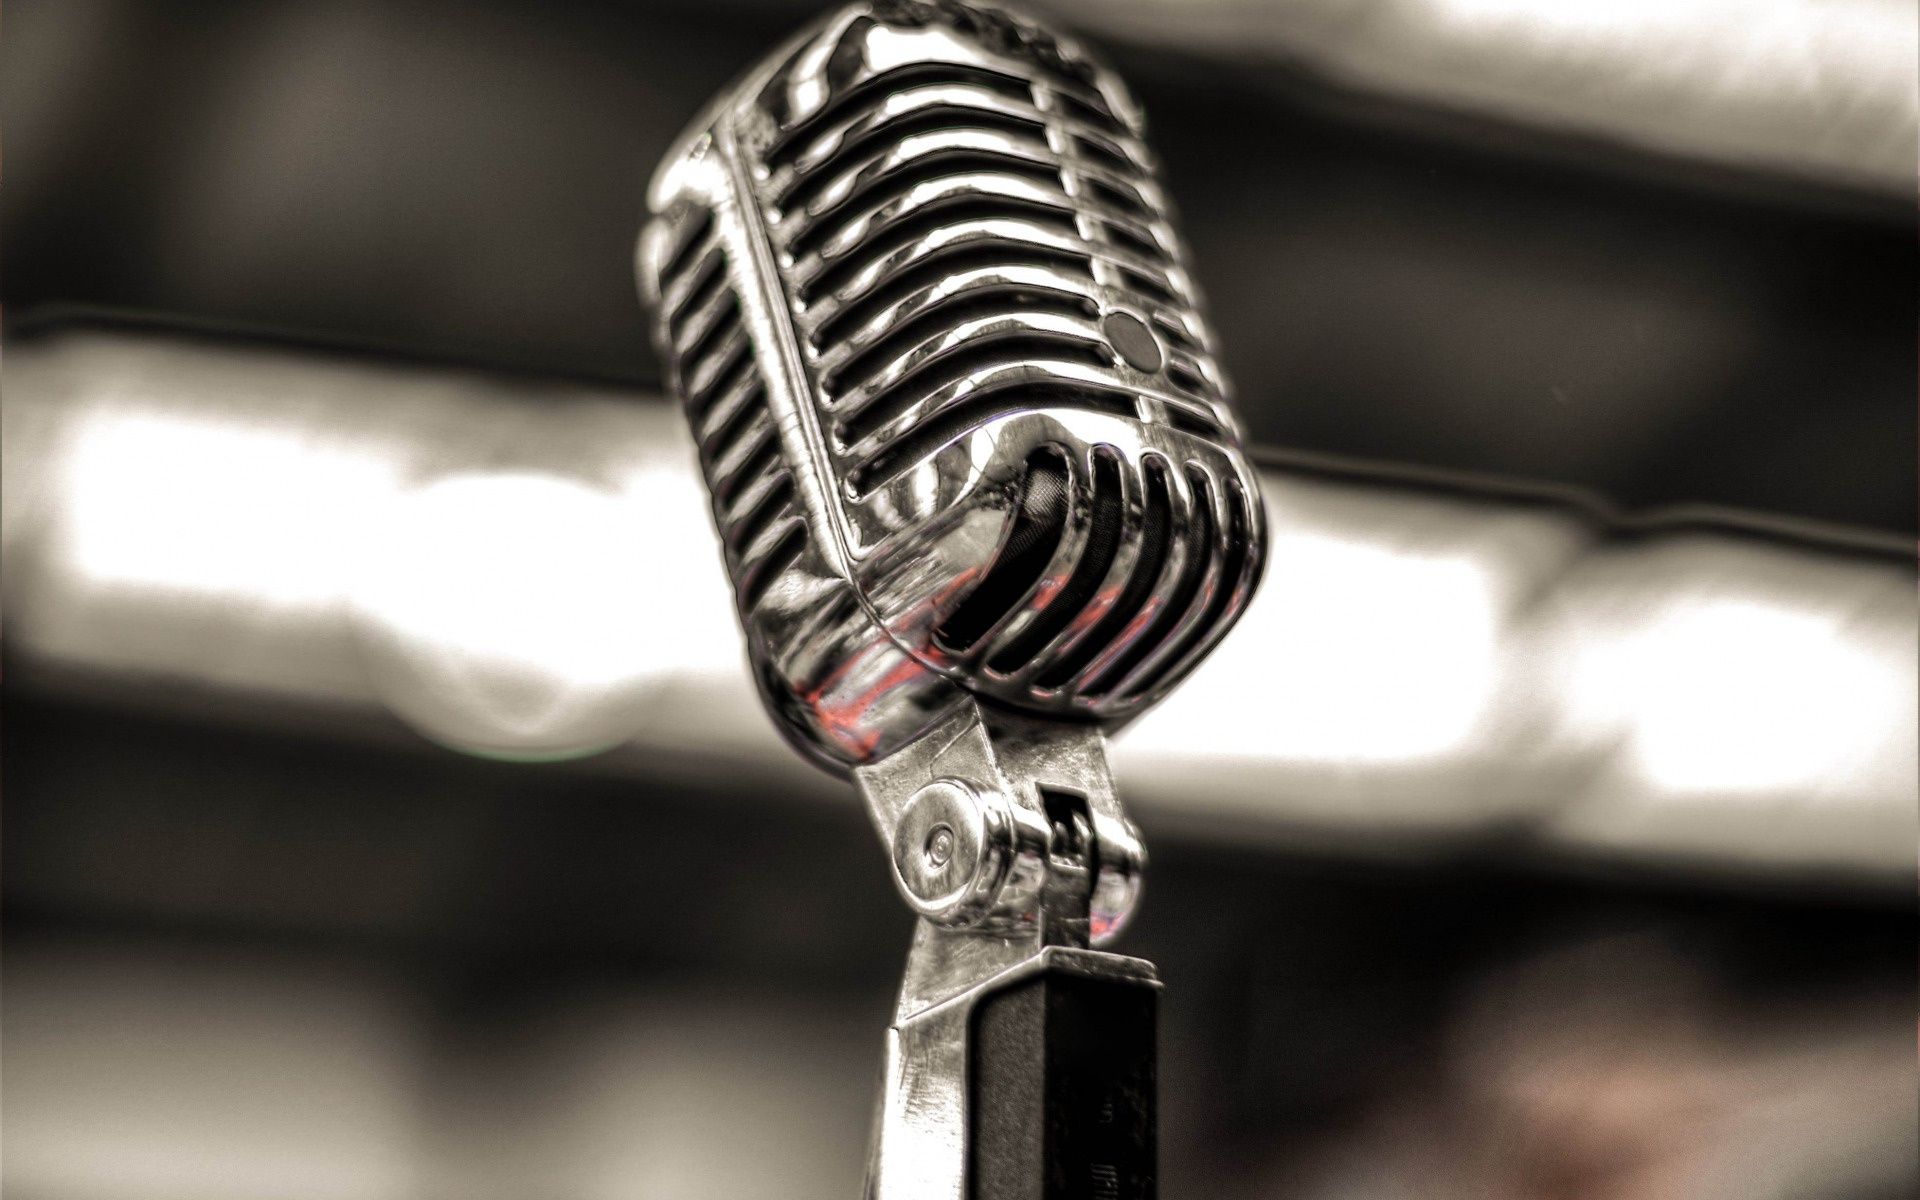 Download wallpaper old steel microphone, Vintage Microphone, Classic Retro Dynamic Vocal Microphone, music concepts, microphones for desktop with resolution 1920x1200. High Quality HD picture wallpaper